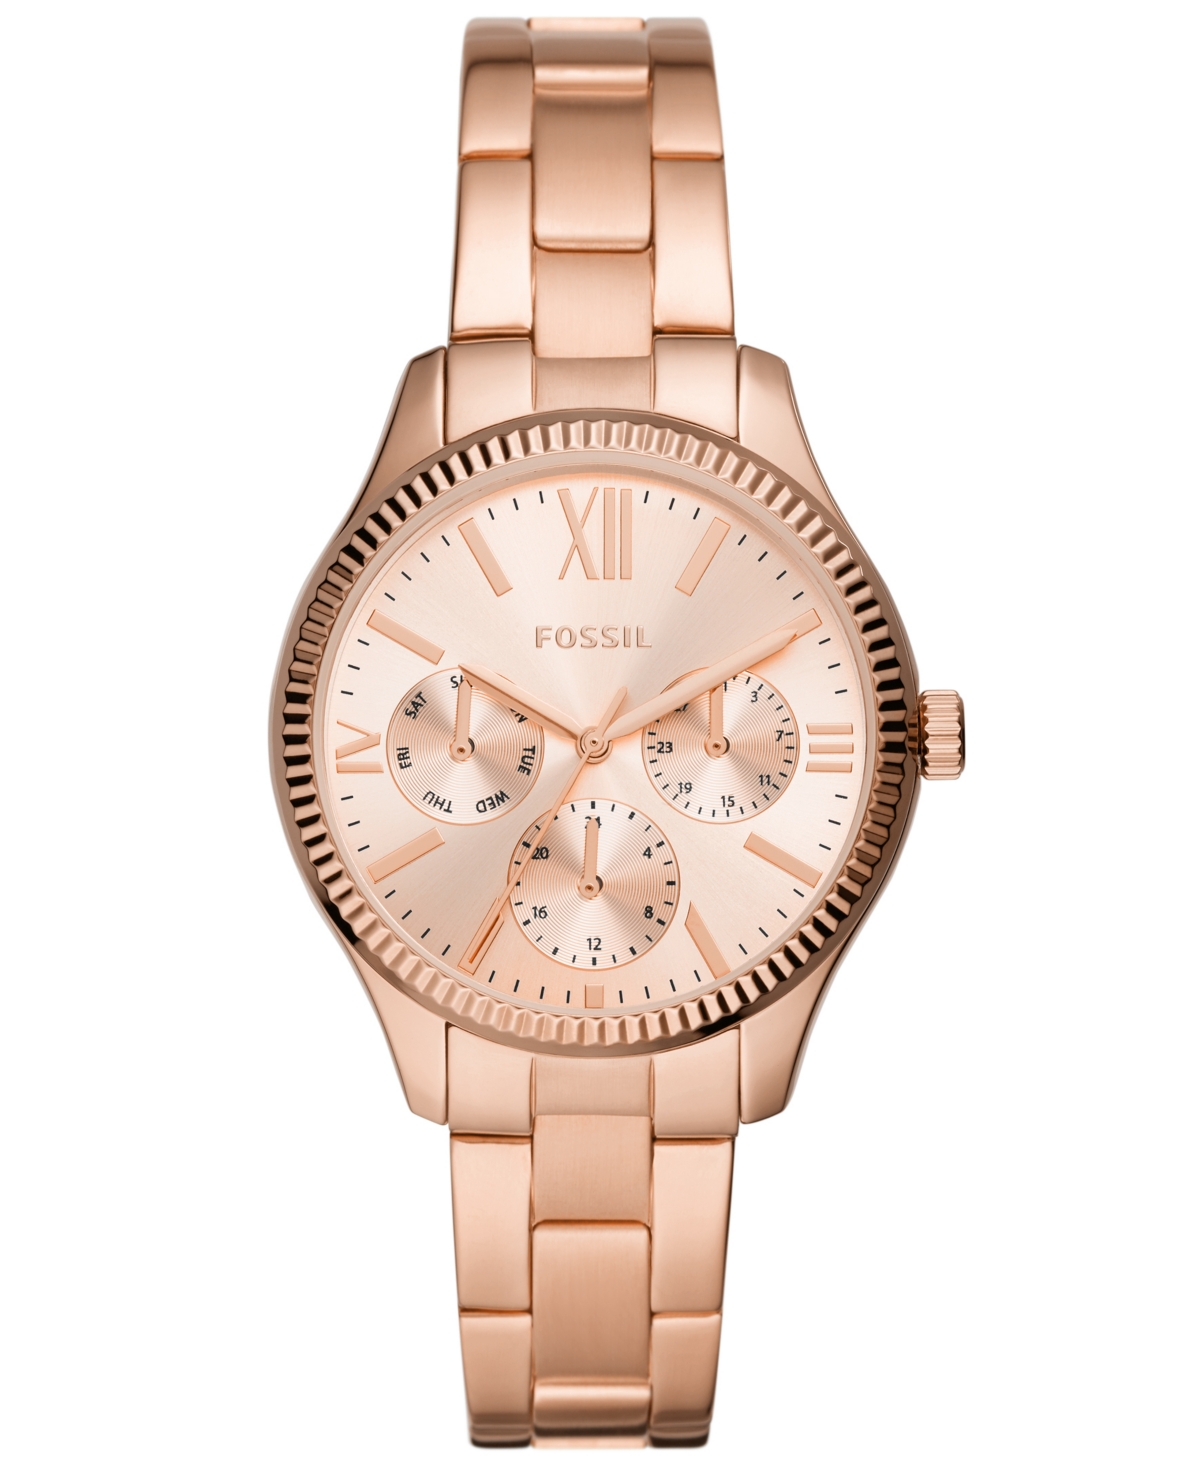 Fossil Women's Rye Multifunction Rose Gold-tone Stainless Steel Watch, 36mm